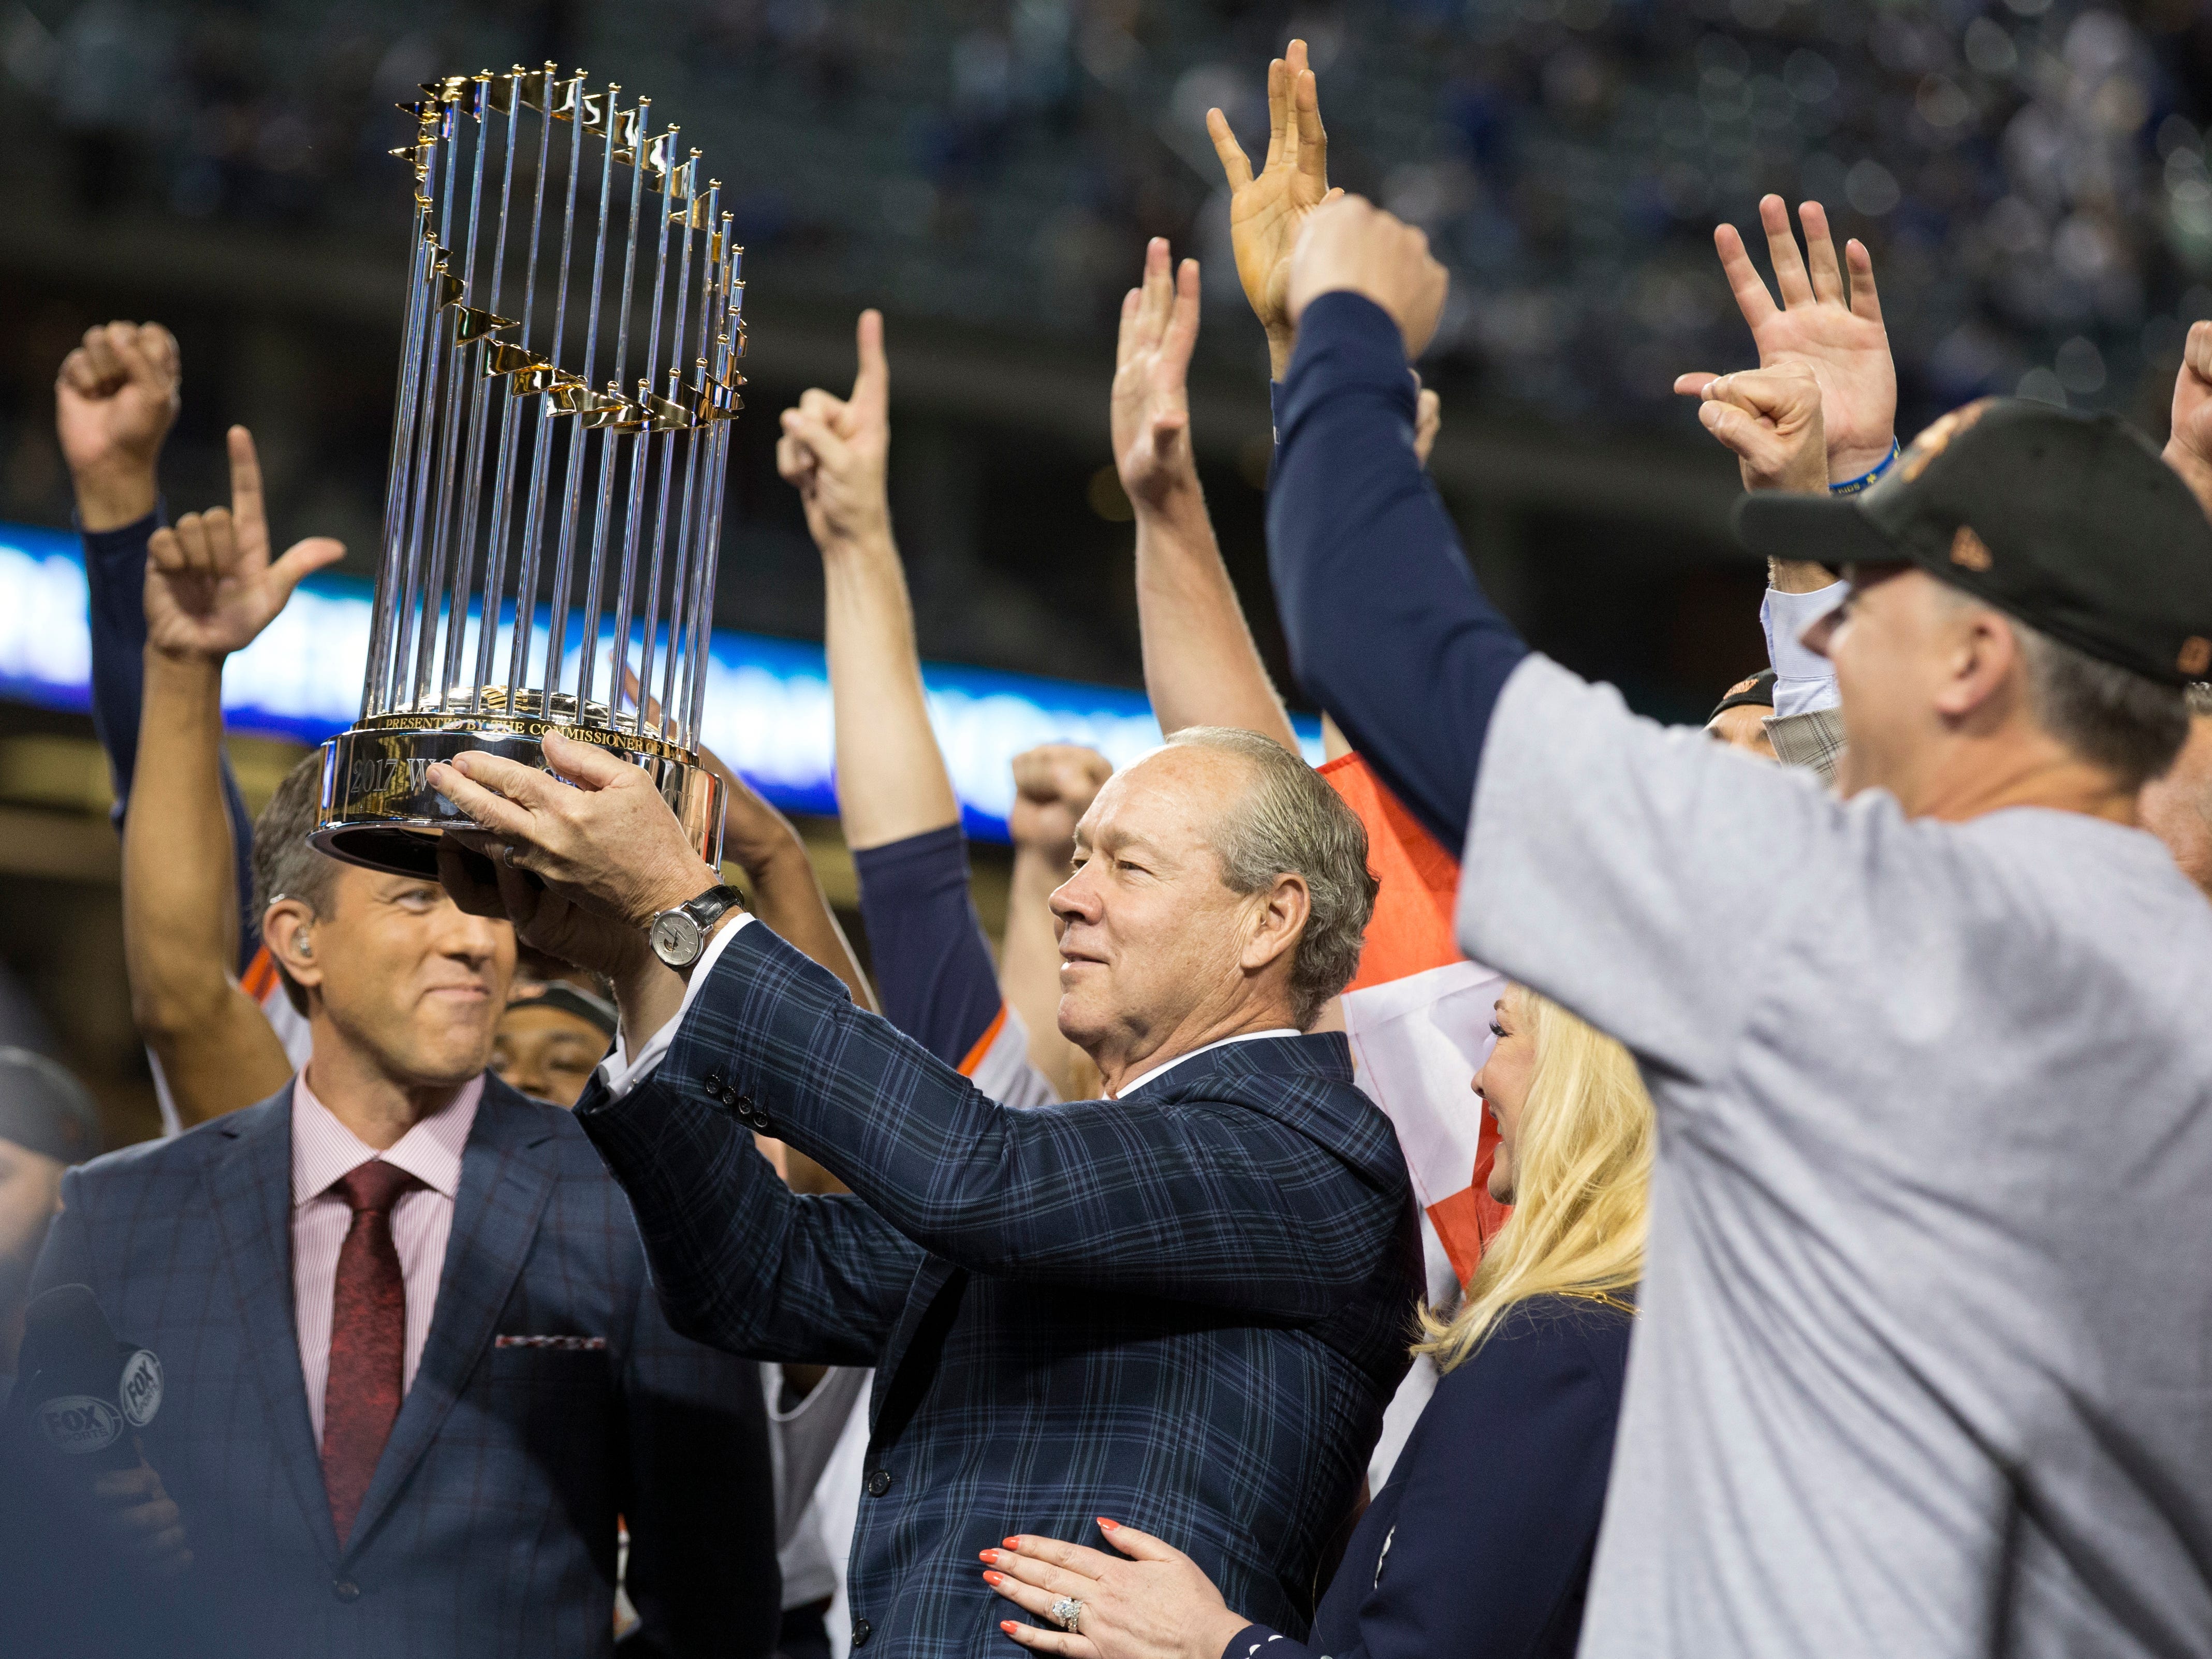 Houston Astros owner Jim Crane hoists the Commissioner's Trophy after the Astros defeated the Los Angeles Dodgers